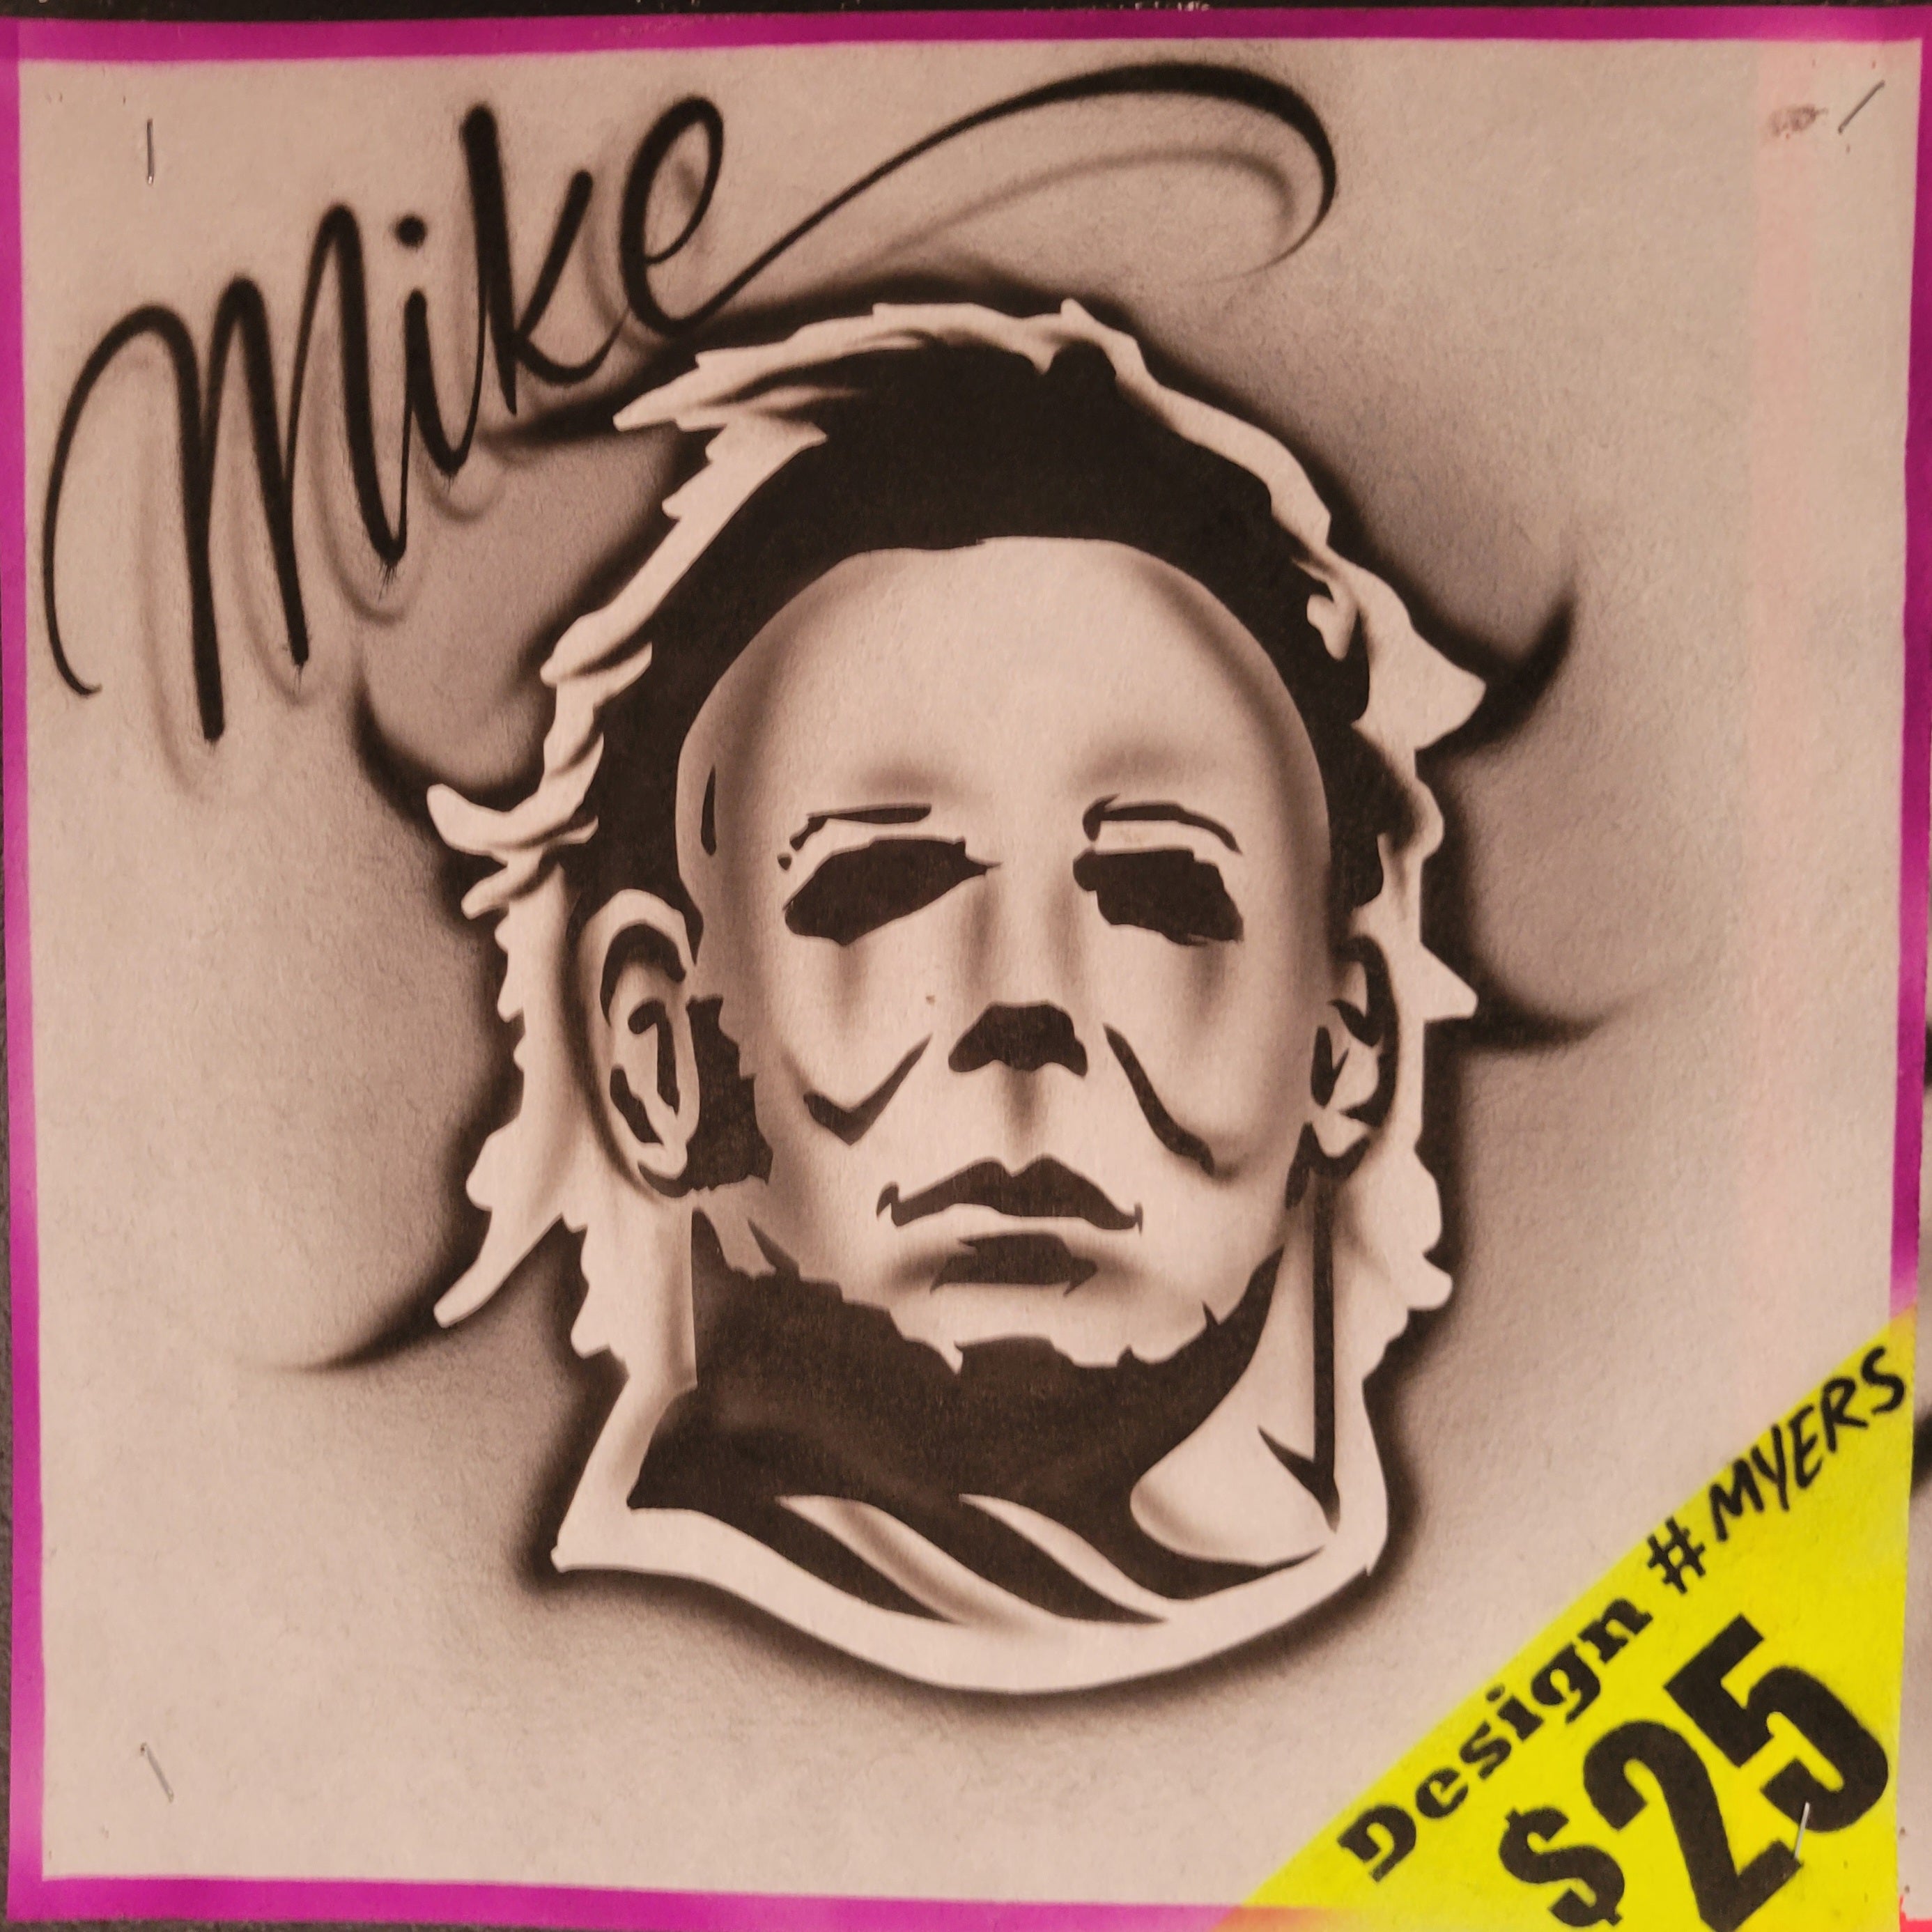 Mike myers tee